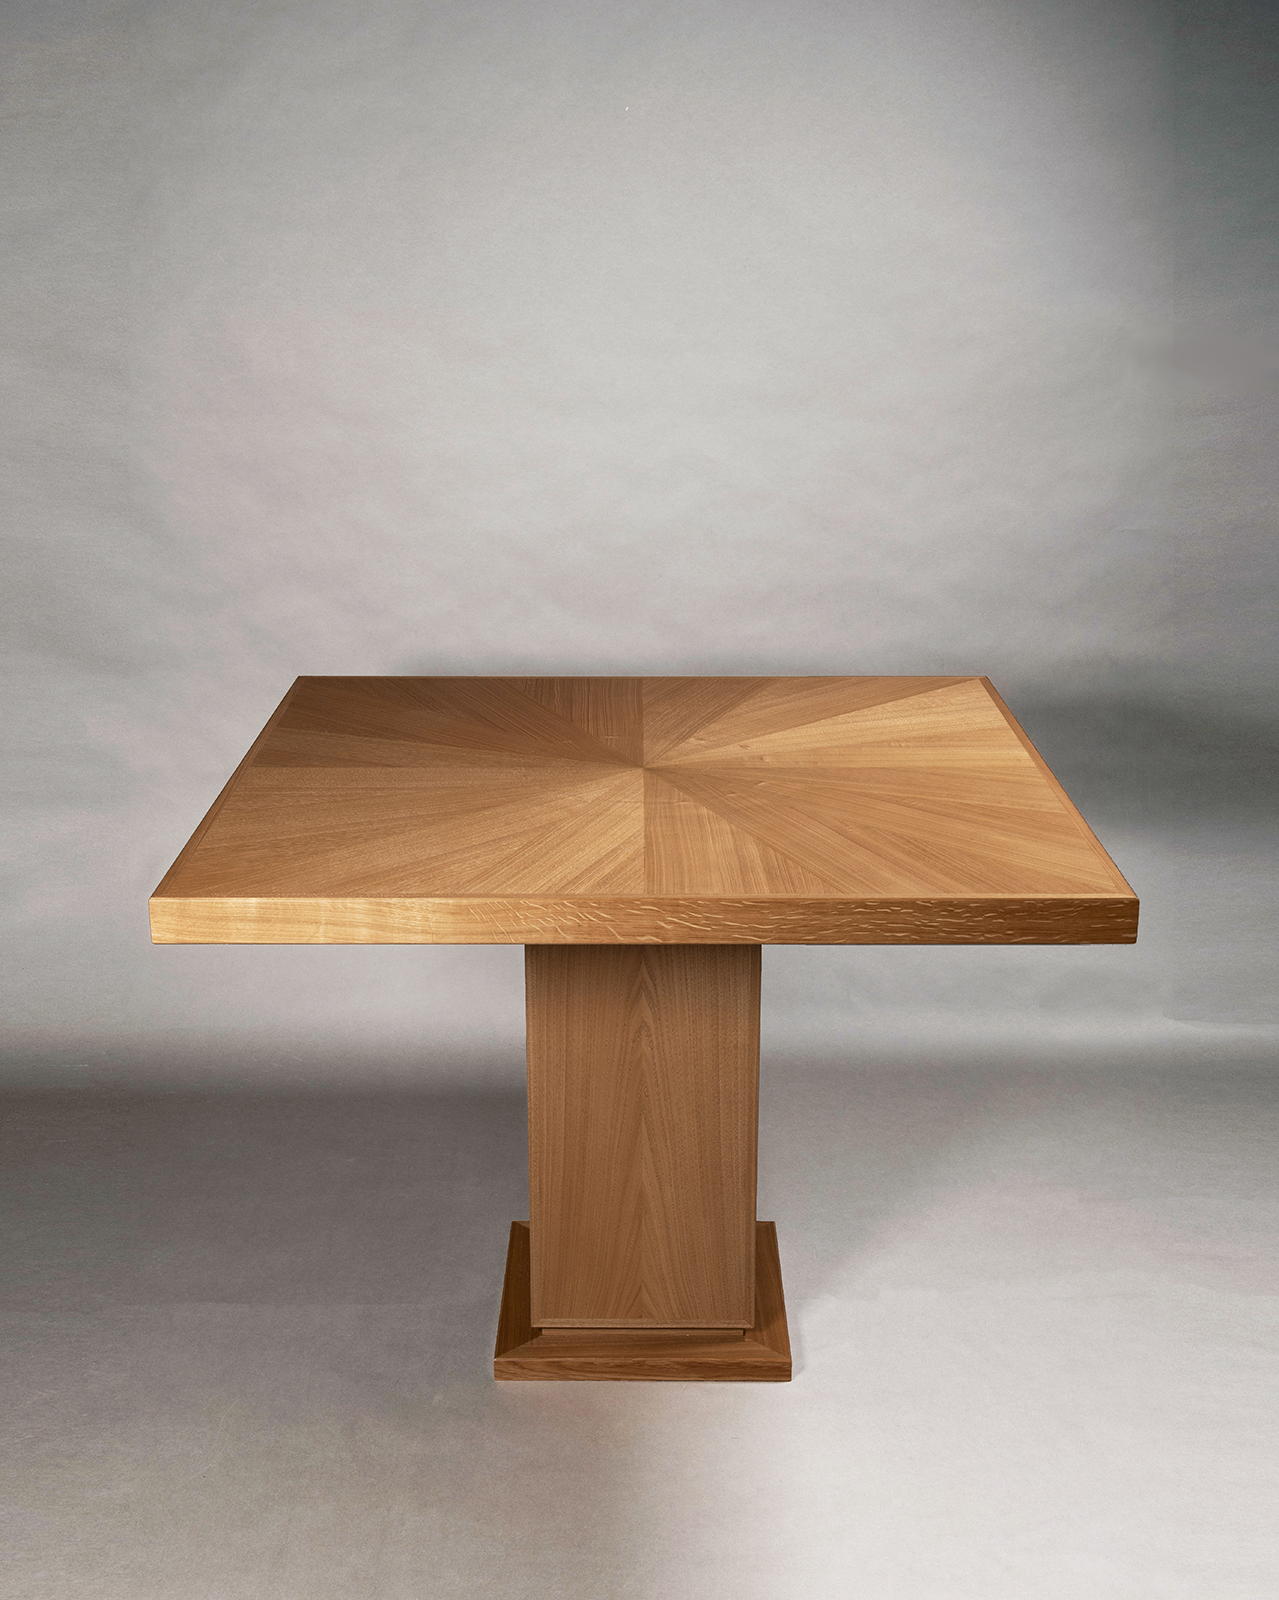 A French Modernist inspired Game Table by ILIAD Design